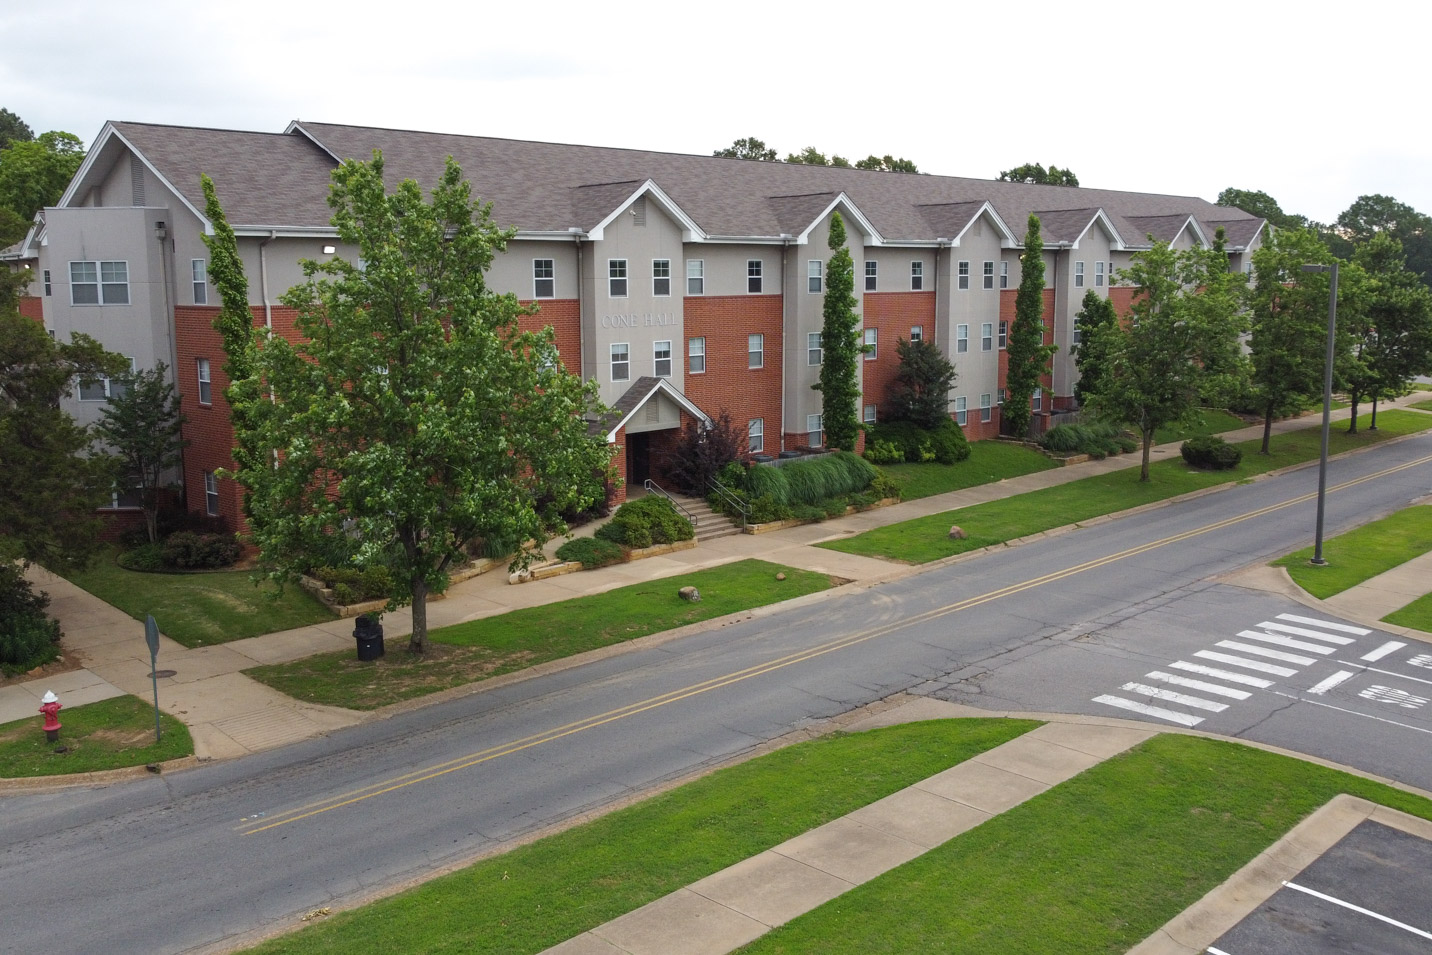 This is a photo of Cone Hall, a men's residence hall at Harding University.